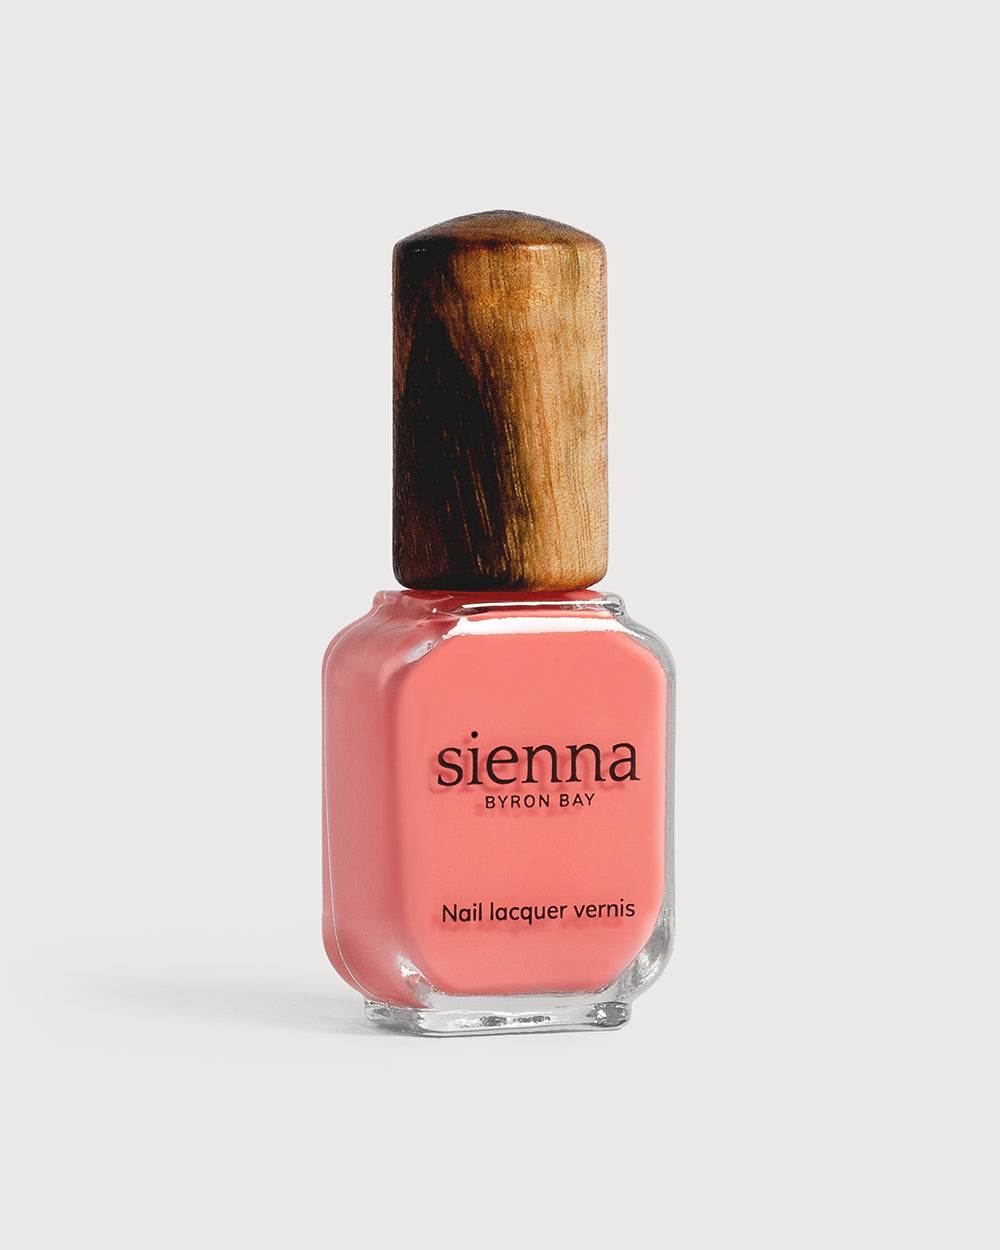 Pink peach nail polish glass bottle with timber cap